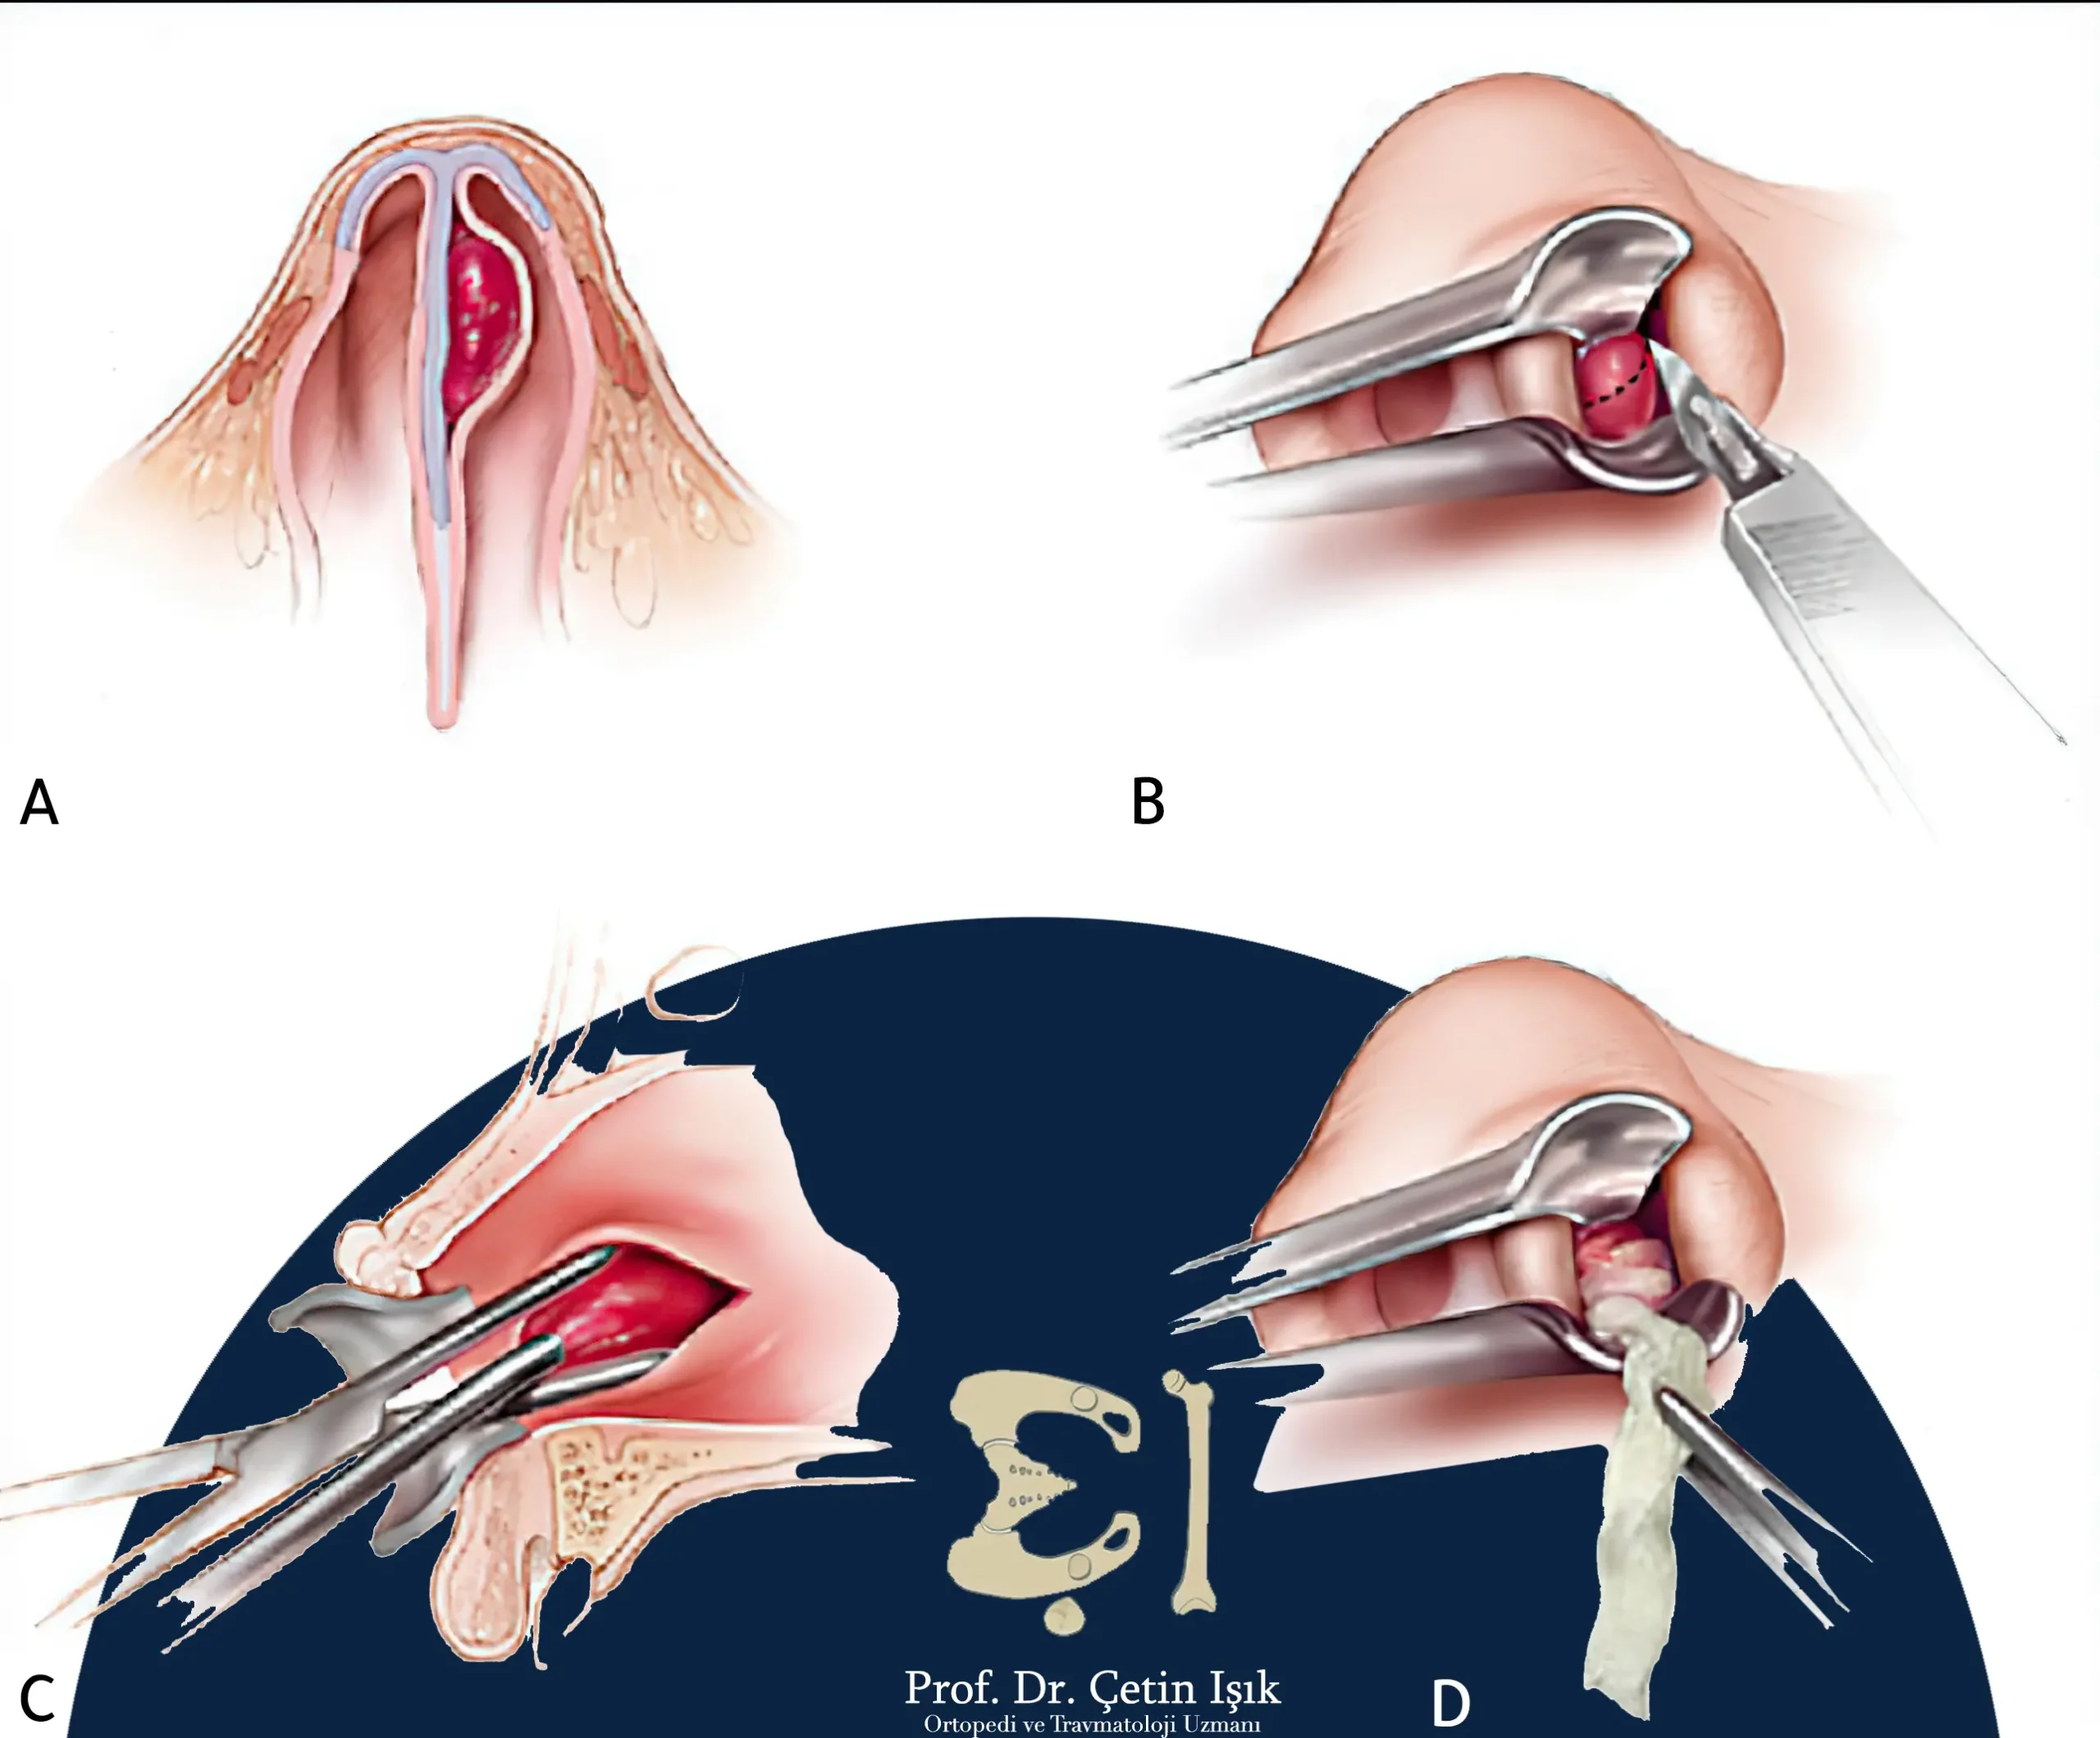 An image showing the method of treating the hematoma formed on the nasal septum, by making a simple incision for the tumor and draining the blood, and then suturing it to ensure that it does not re-form